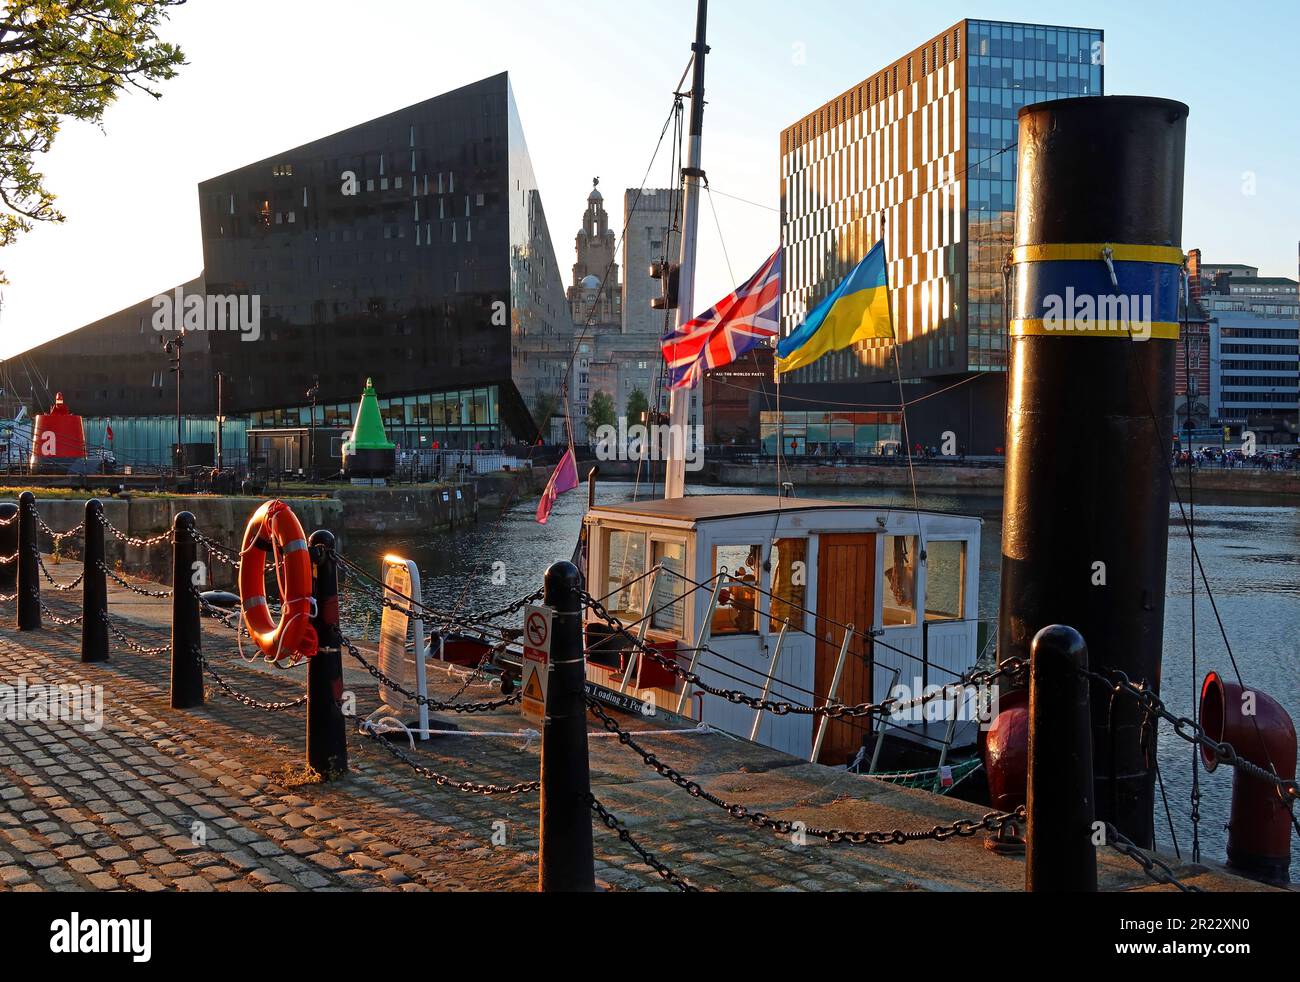 Royal Albert Dock, Mann Island at sunset, with steam tug and flags, Pier Head, Liverpool, Merseyside, England, UK, L3 4AF Stock Photo